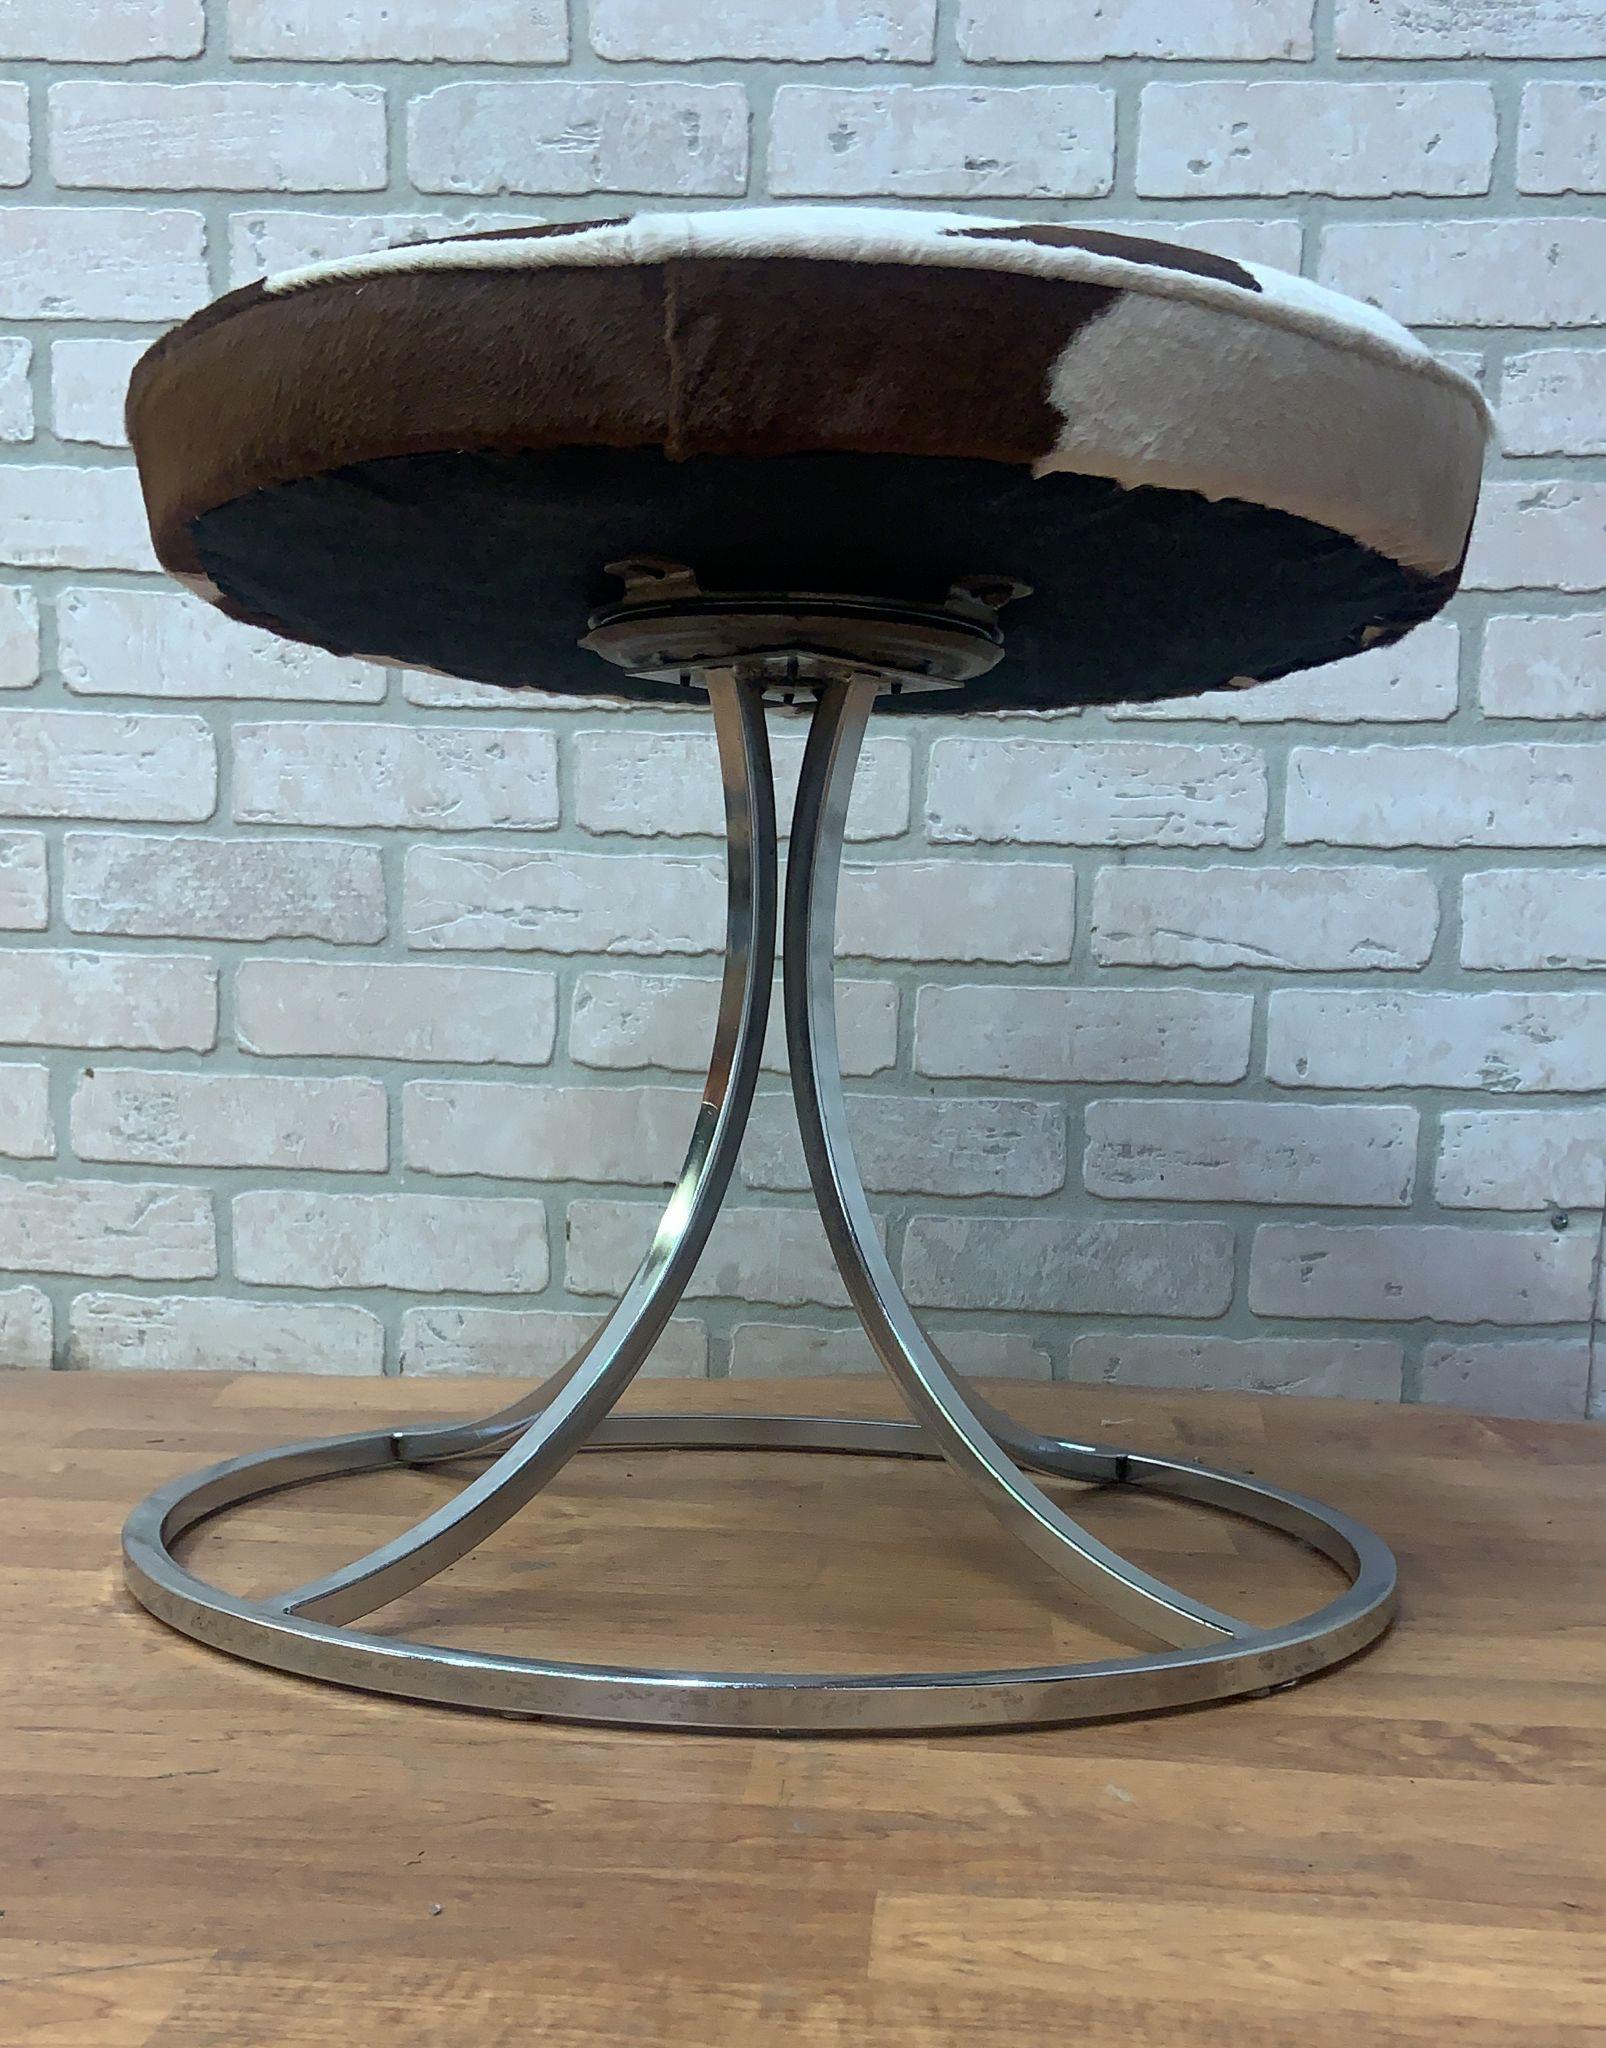 Mid Century Modern Avard Style Chrome Tubular Swivel Base Stools Newly Upholstered in Cowhide - Set of 4

Stunning set of mid century modern Avard style chrome squared tubular round cushion top swivel vanity/accent stools. Each stool has been newly